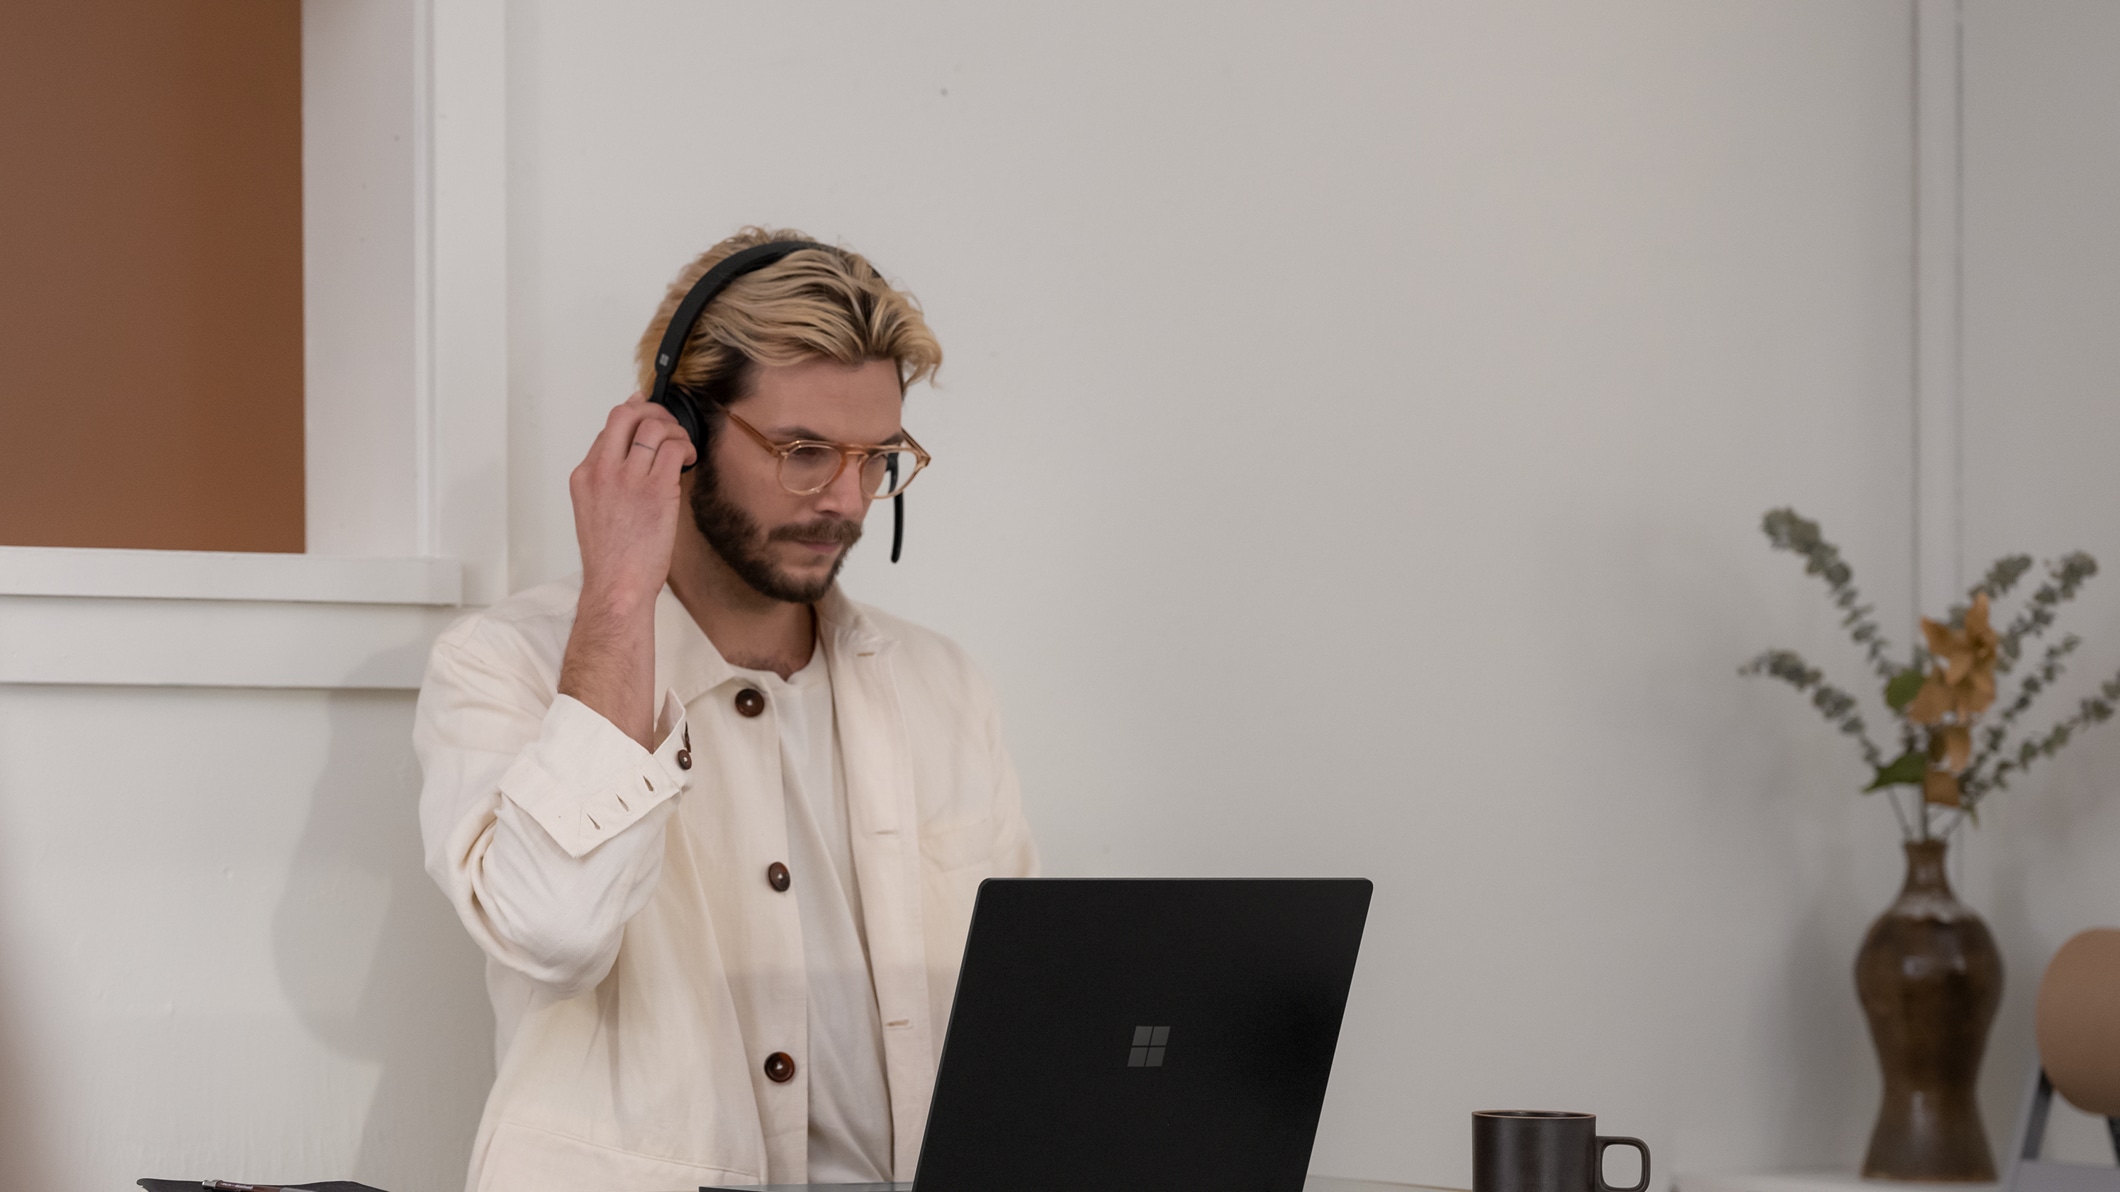 A person uses a Microsoft Modern Wireless Headset while looking at a device.